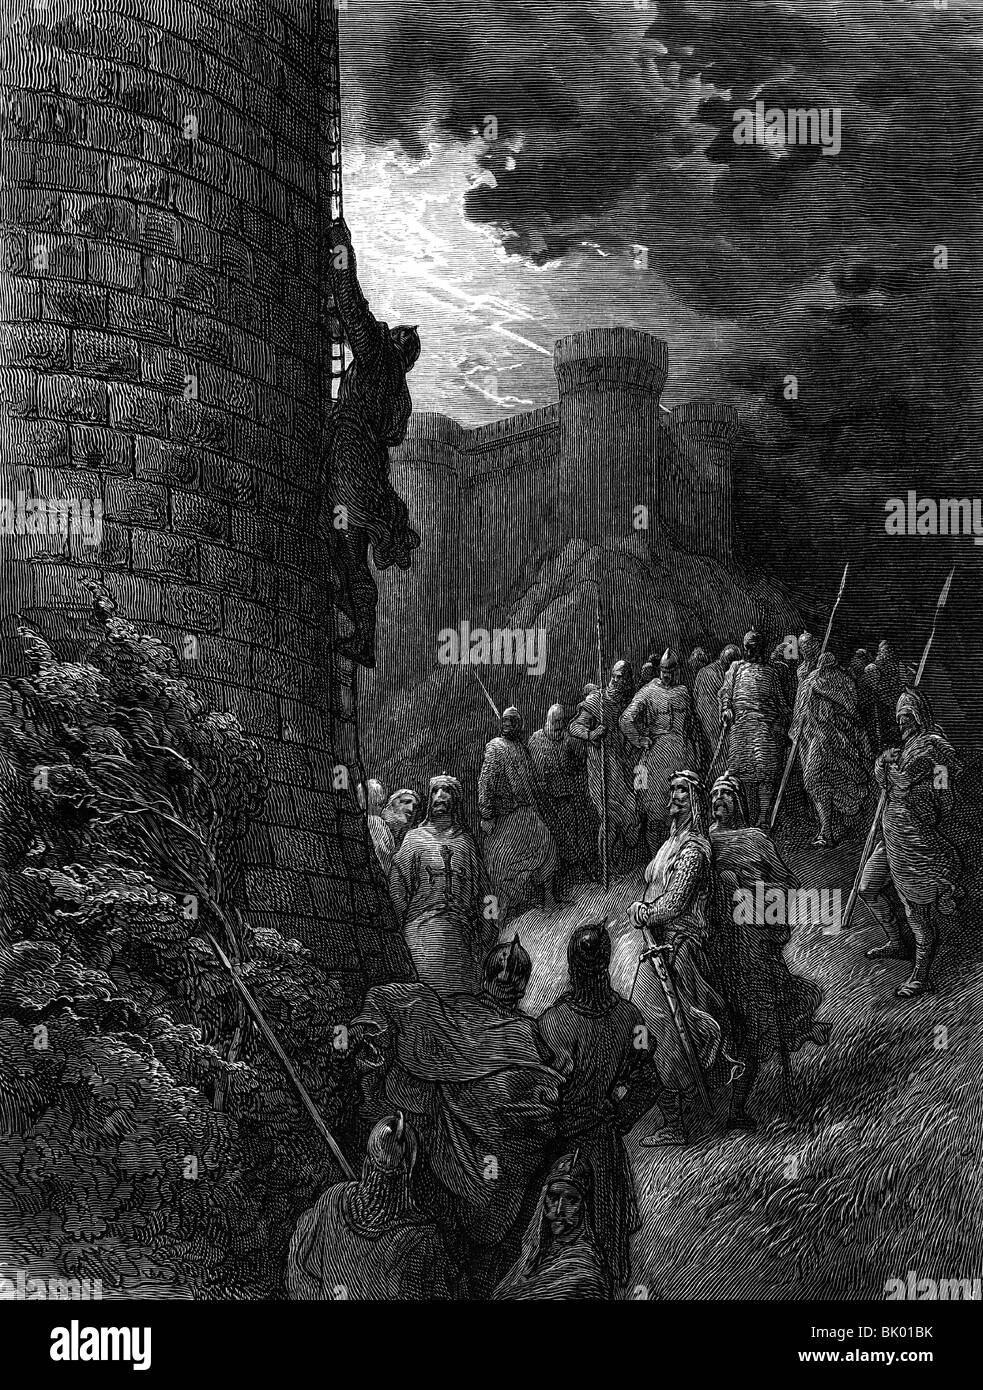 Middle Ages, crusades, First Crusade 1096 - 1099, seizure of Antioch, Bohemond of Taranto is climbing a tower, 2.6.1098, wood engraving by Pisa after drawing by Gustav Dore, 'Histoire des croisades' by Joseph Francois Michaud, 1875, Artist's Copyright has not to be cleared Stock Photo